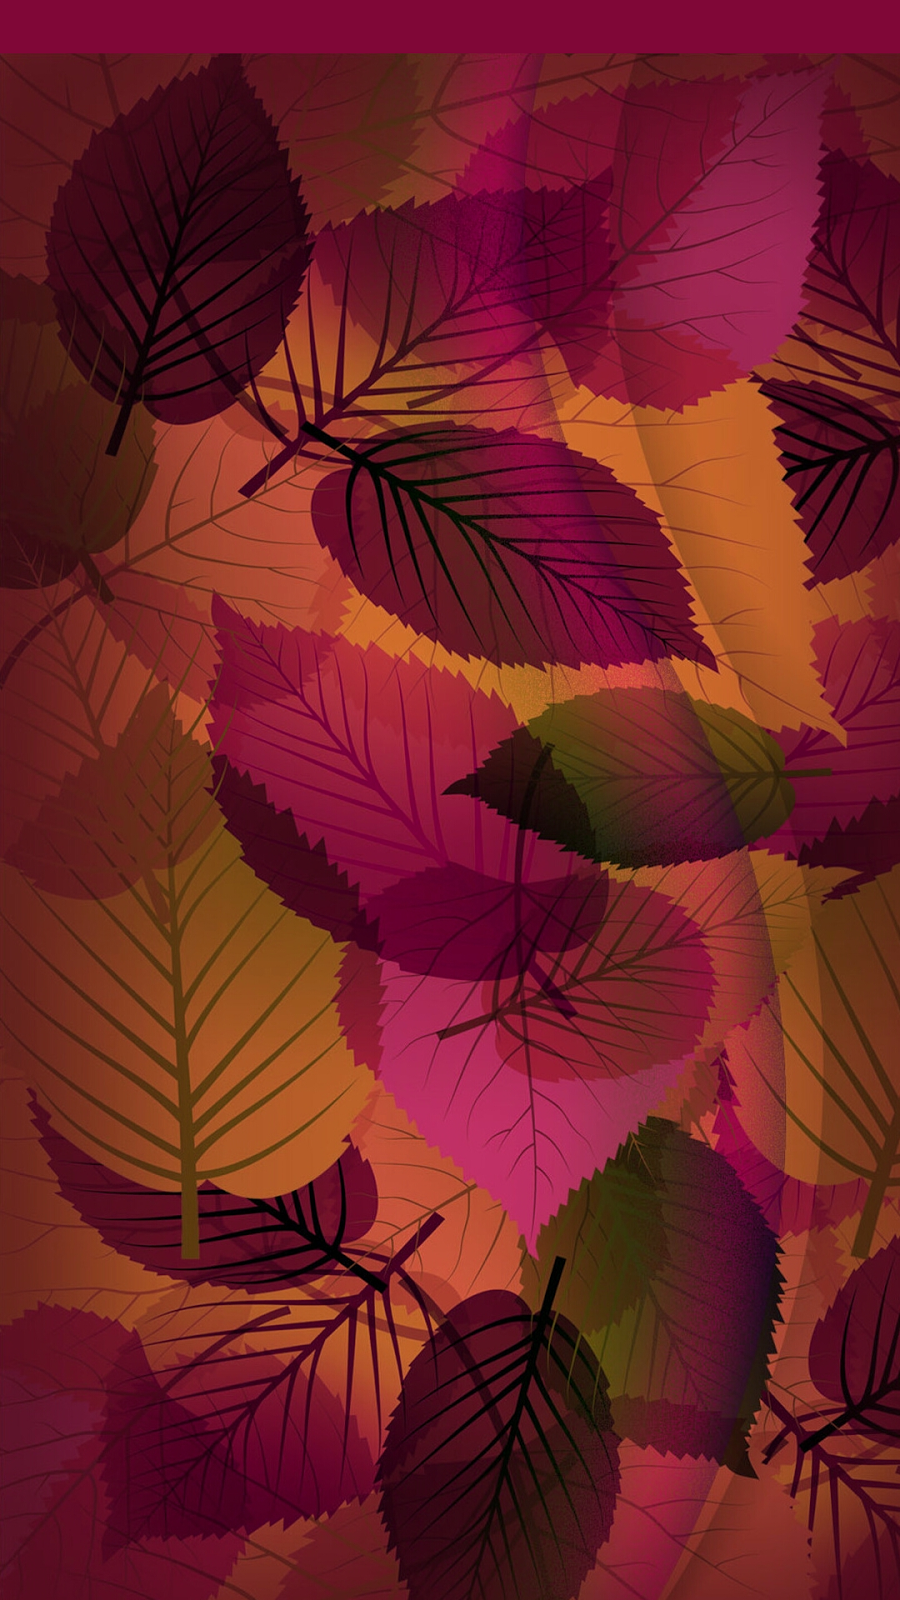 Pin by Mhay Calina on mmmm Autumn leaves wallpaper, Fall